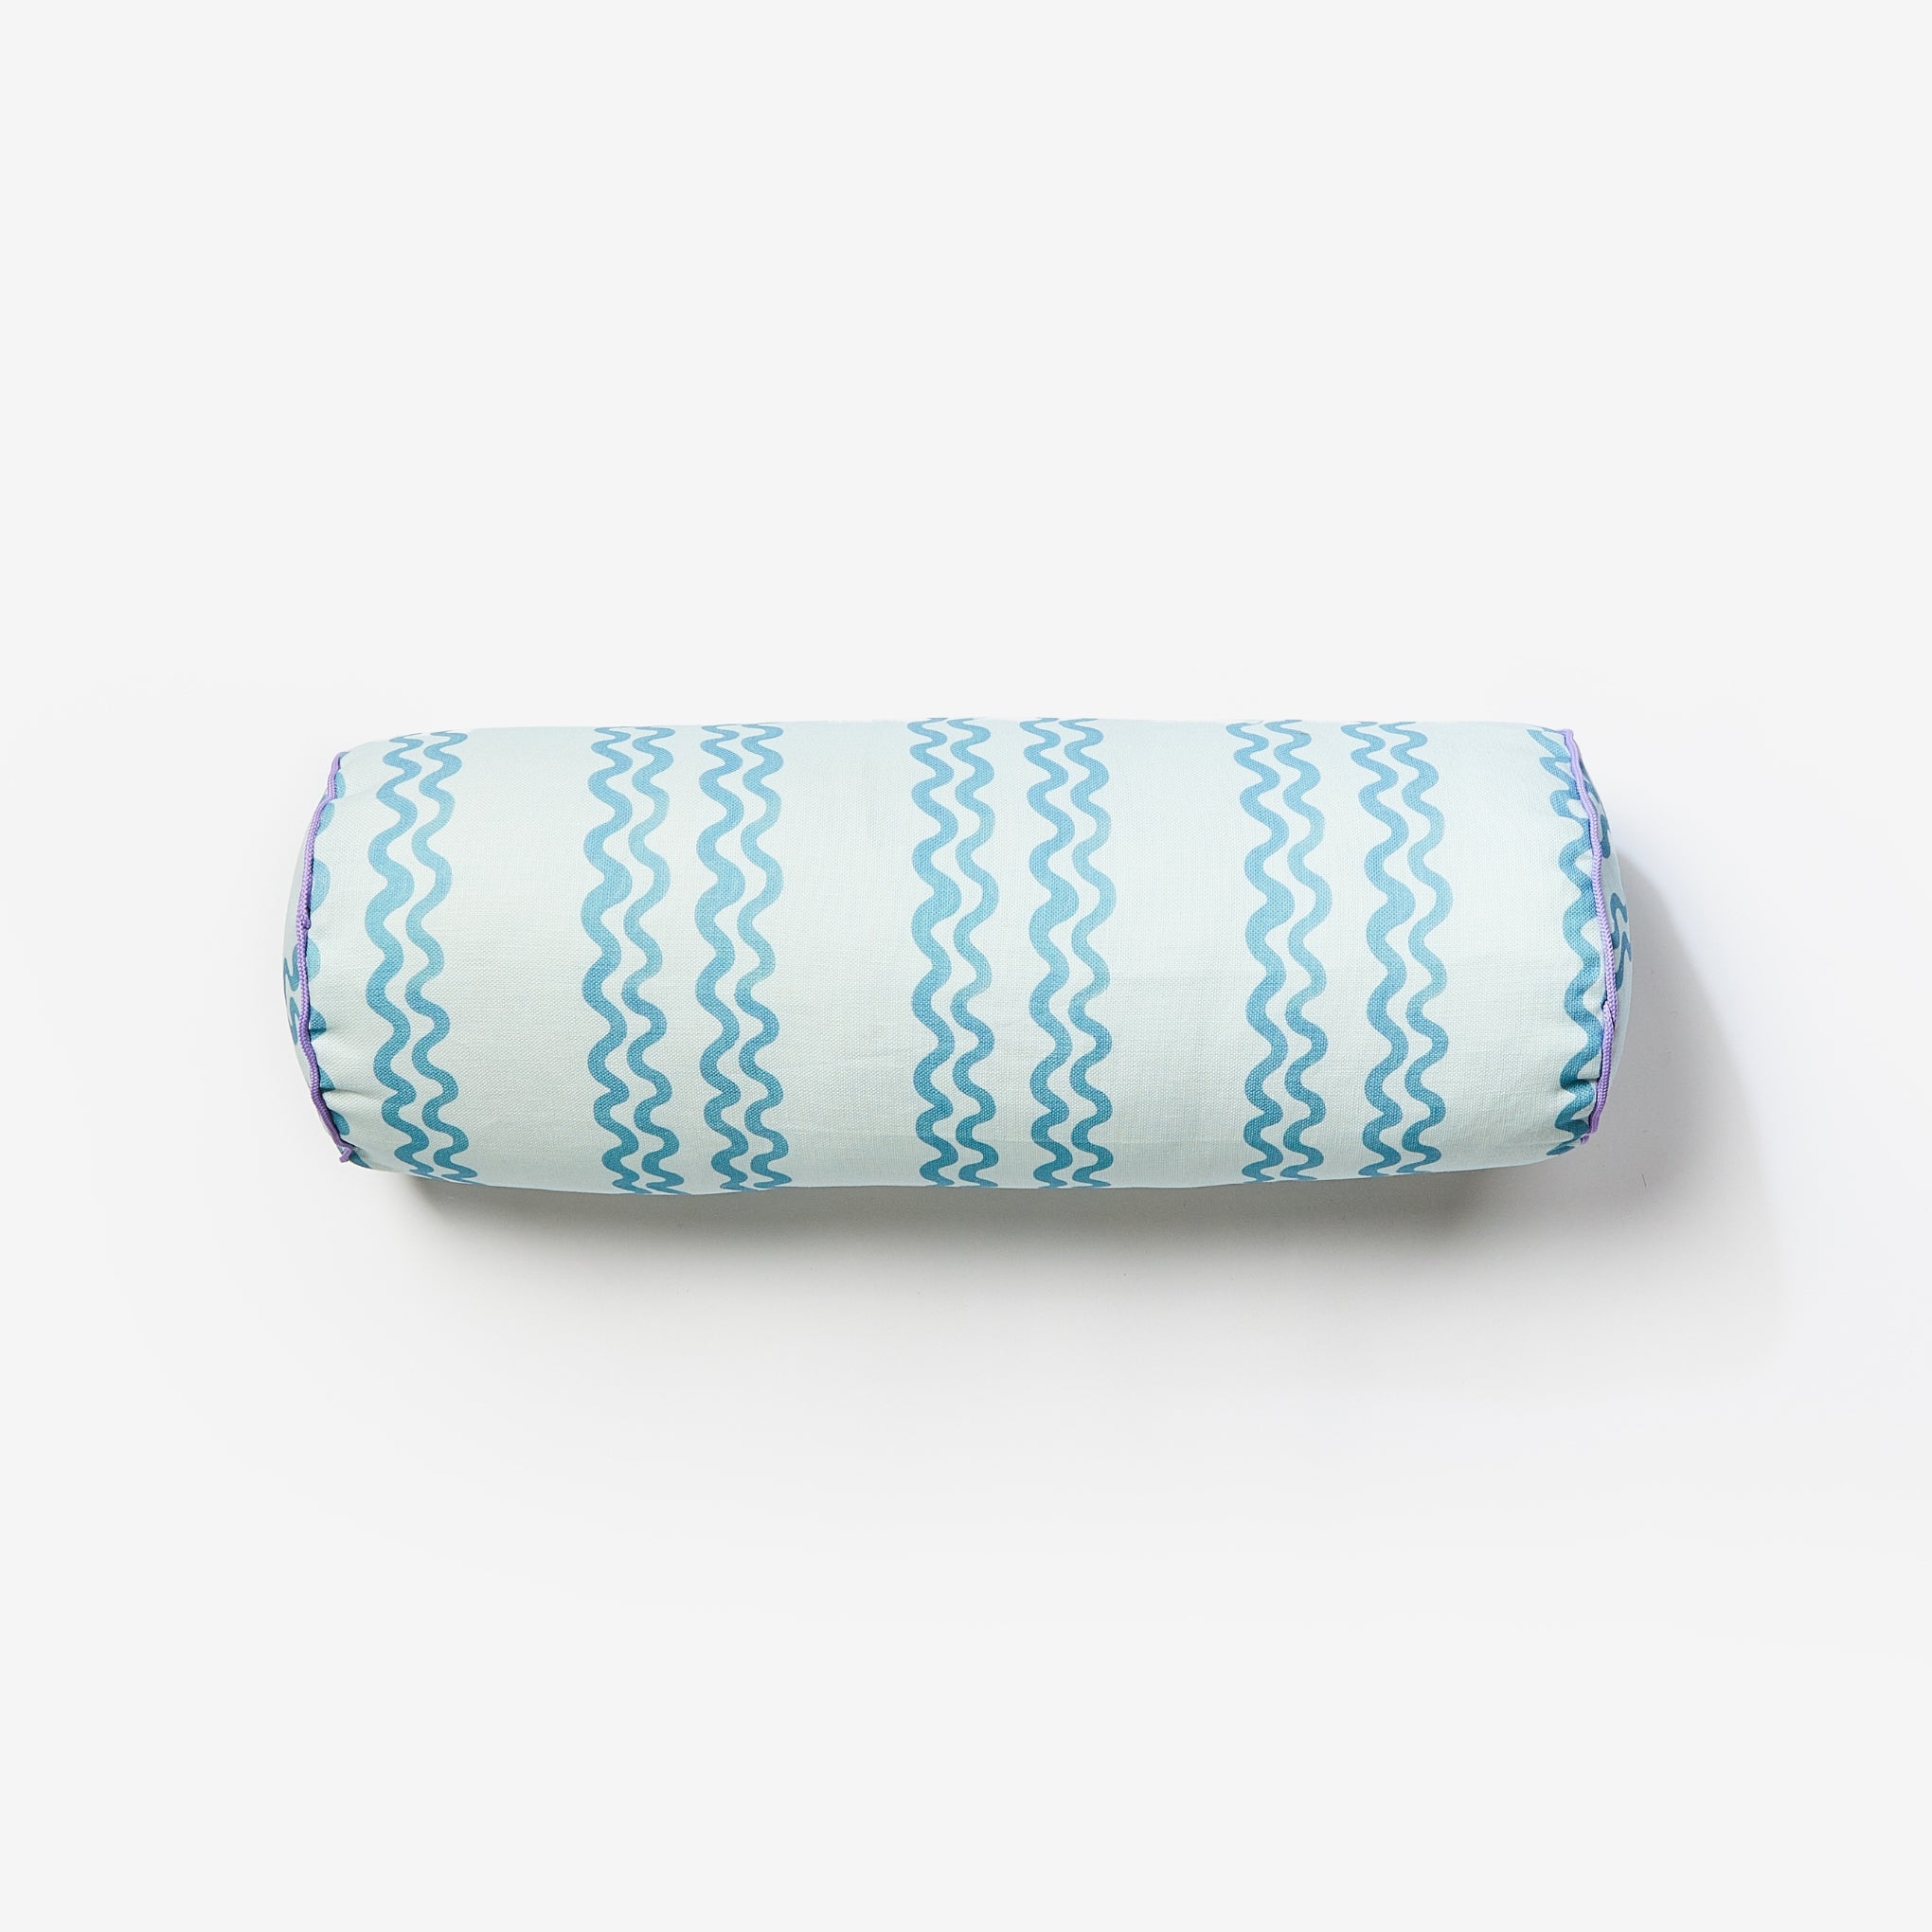 Double Waves Blue 60x20cm Outdoor Bolster Cushion